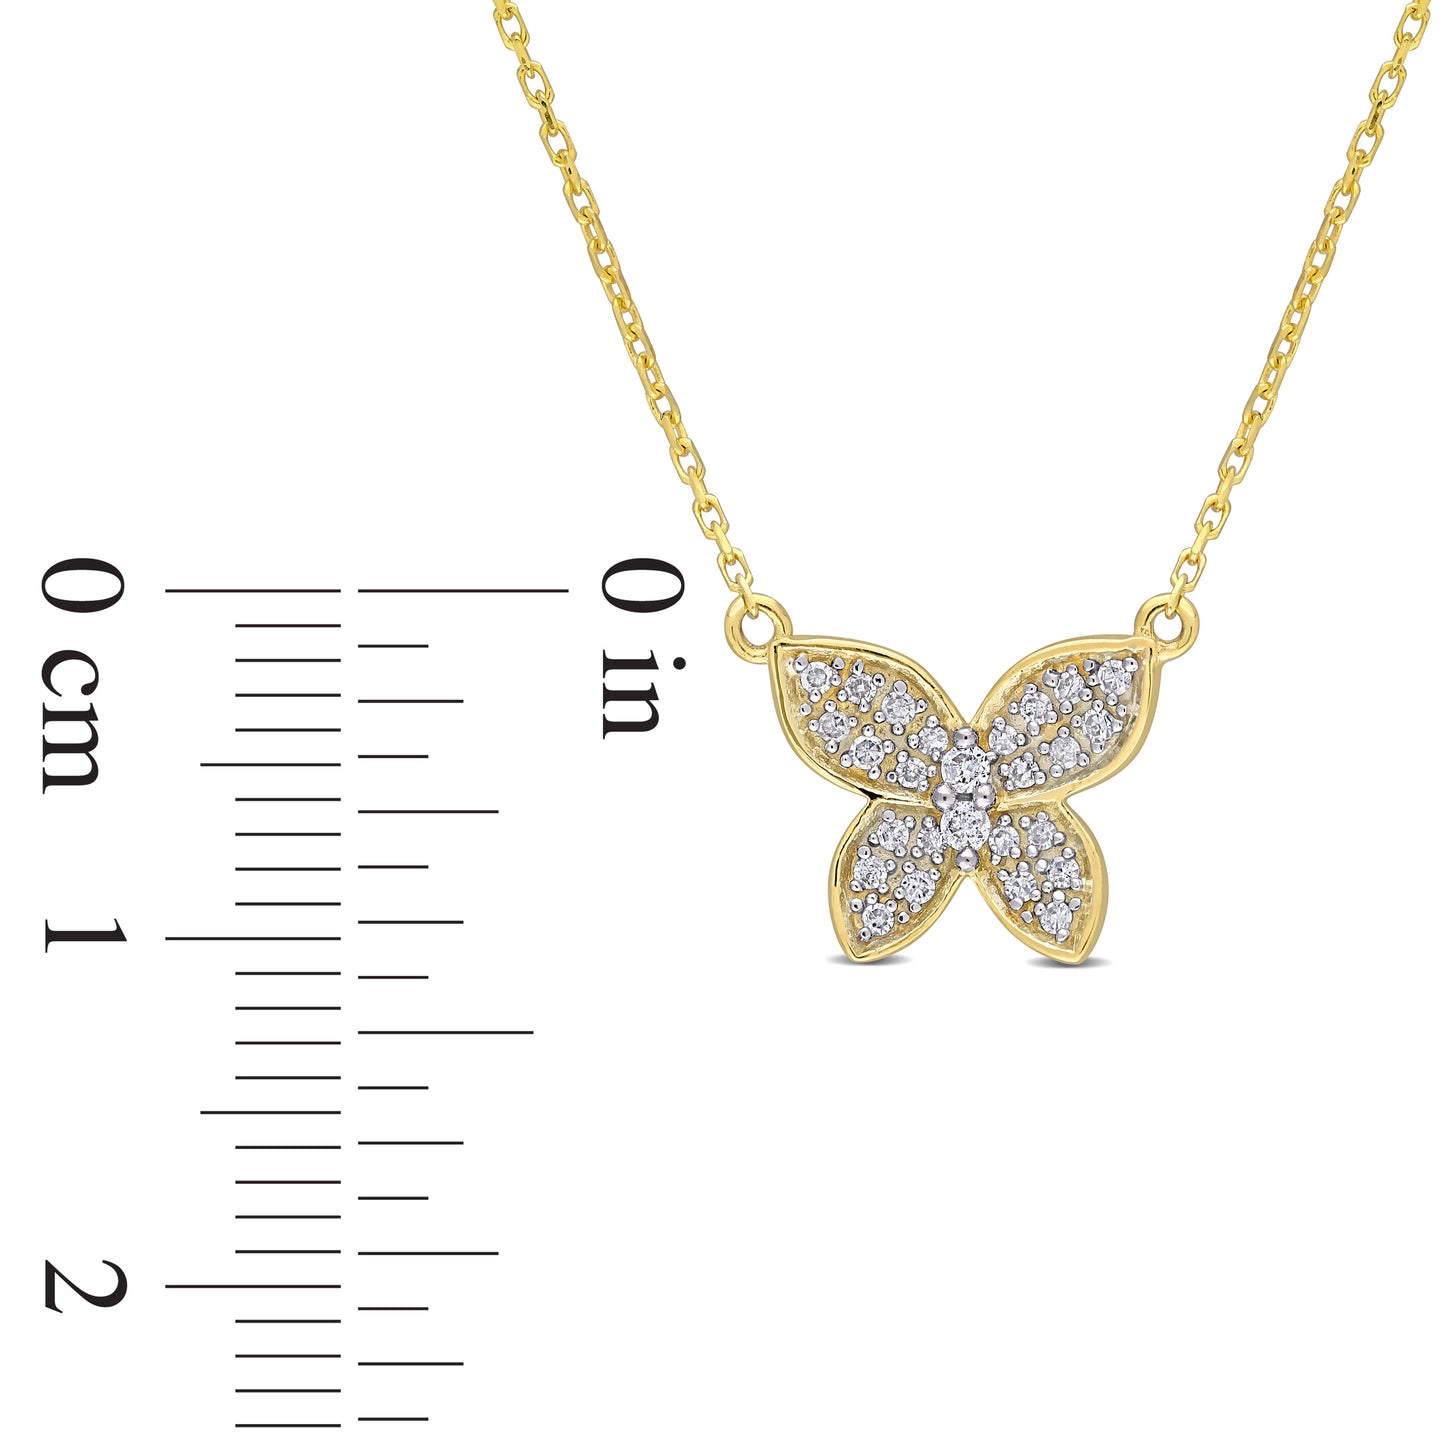 Butterfly Cluster Diamond Necklace in 10k Yellow Gold